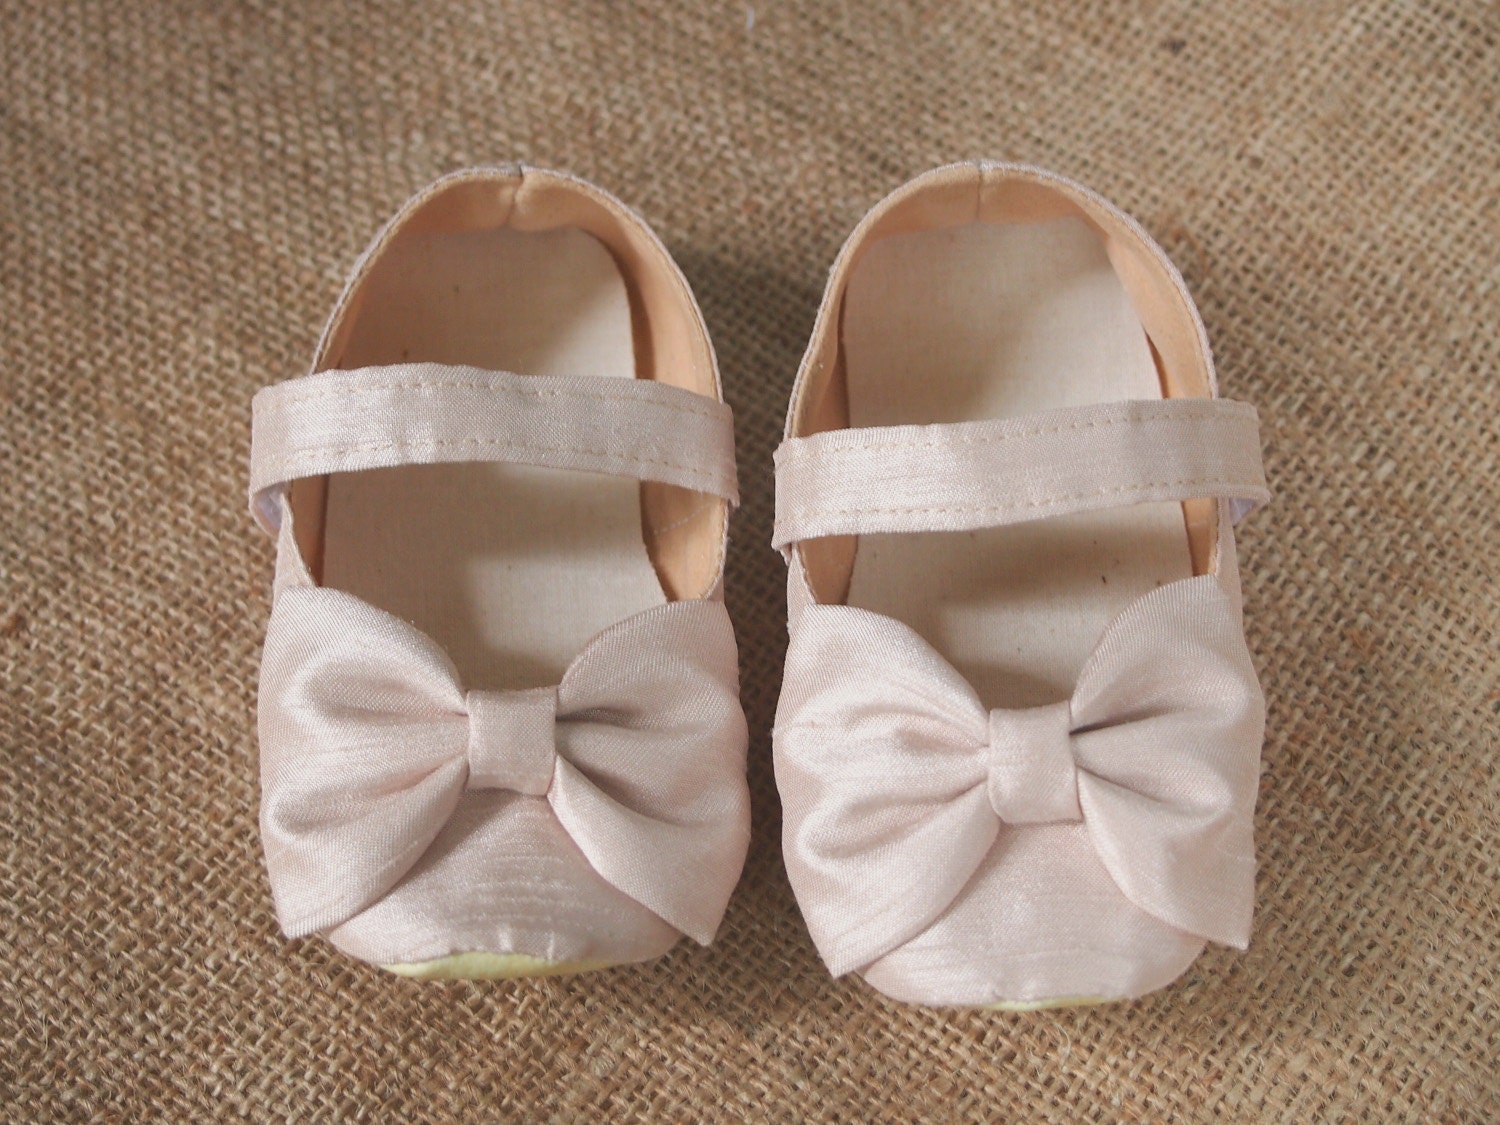 ... Baby, Wedding Shoes, Flower Girl Shoes, Dress Shoes, Baptism